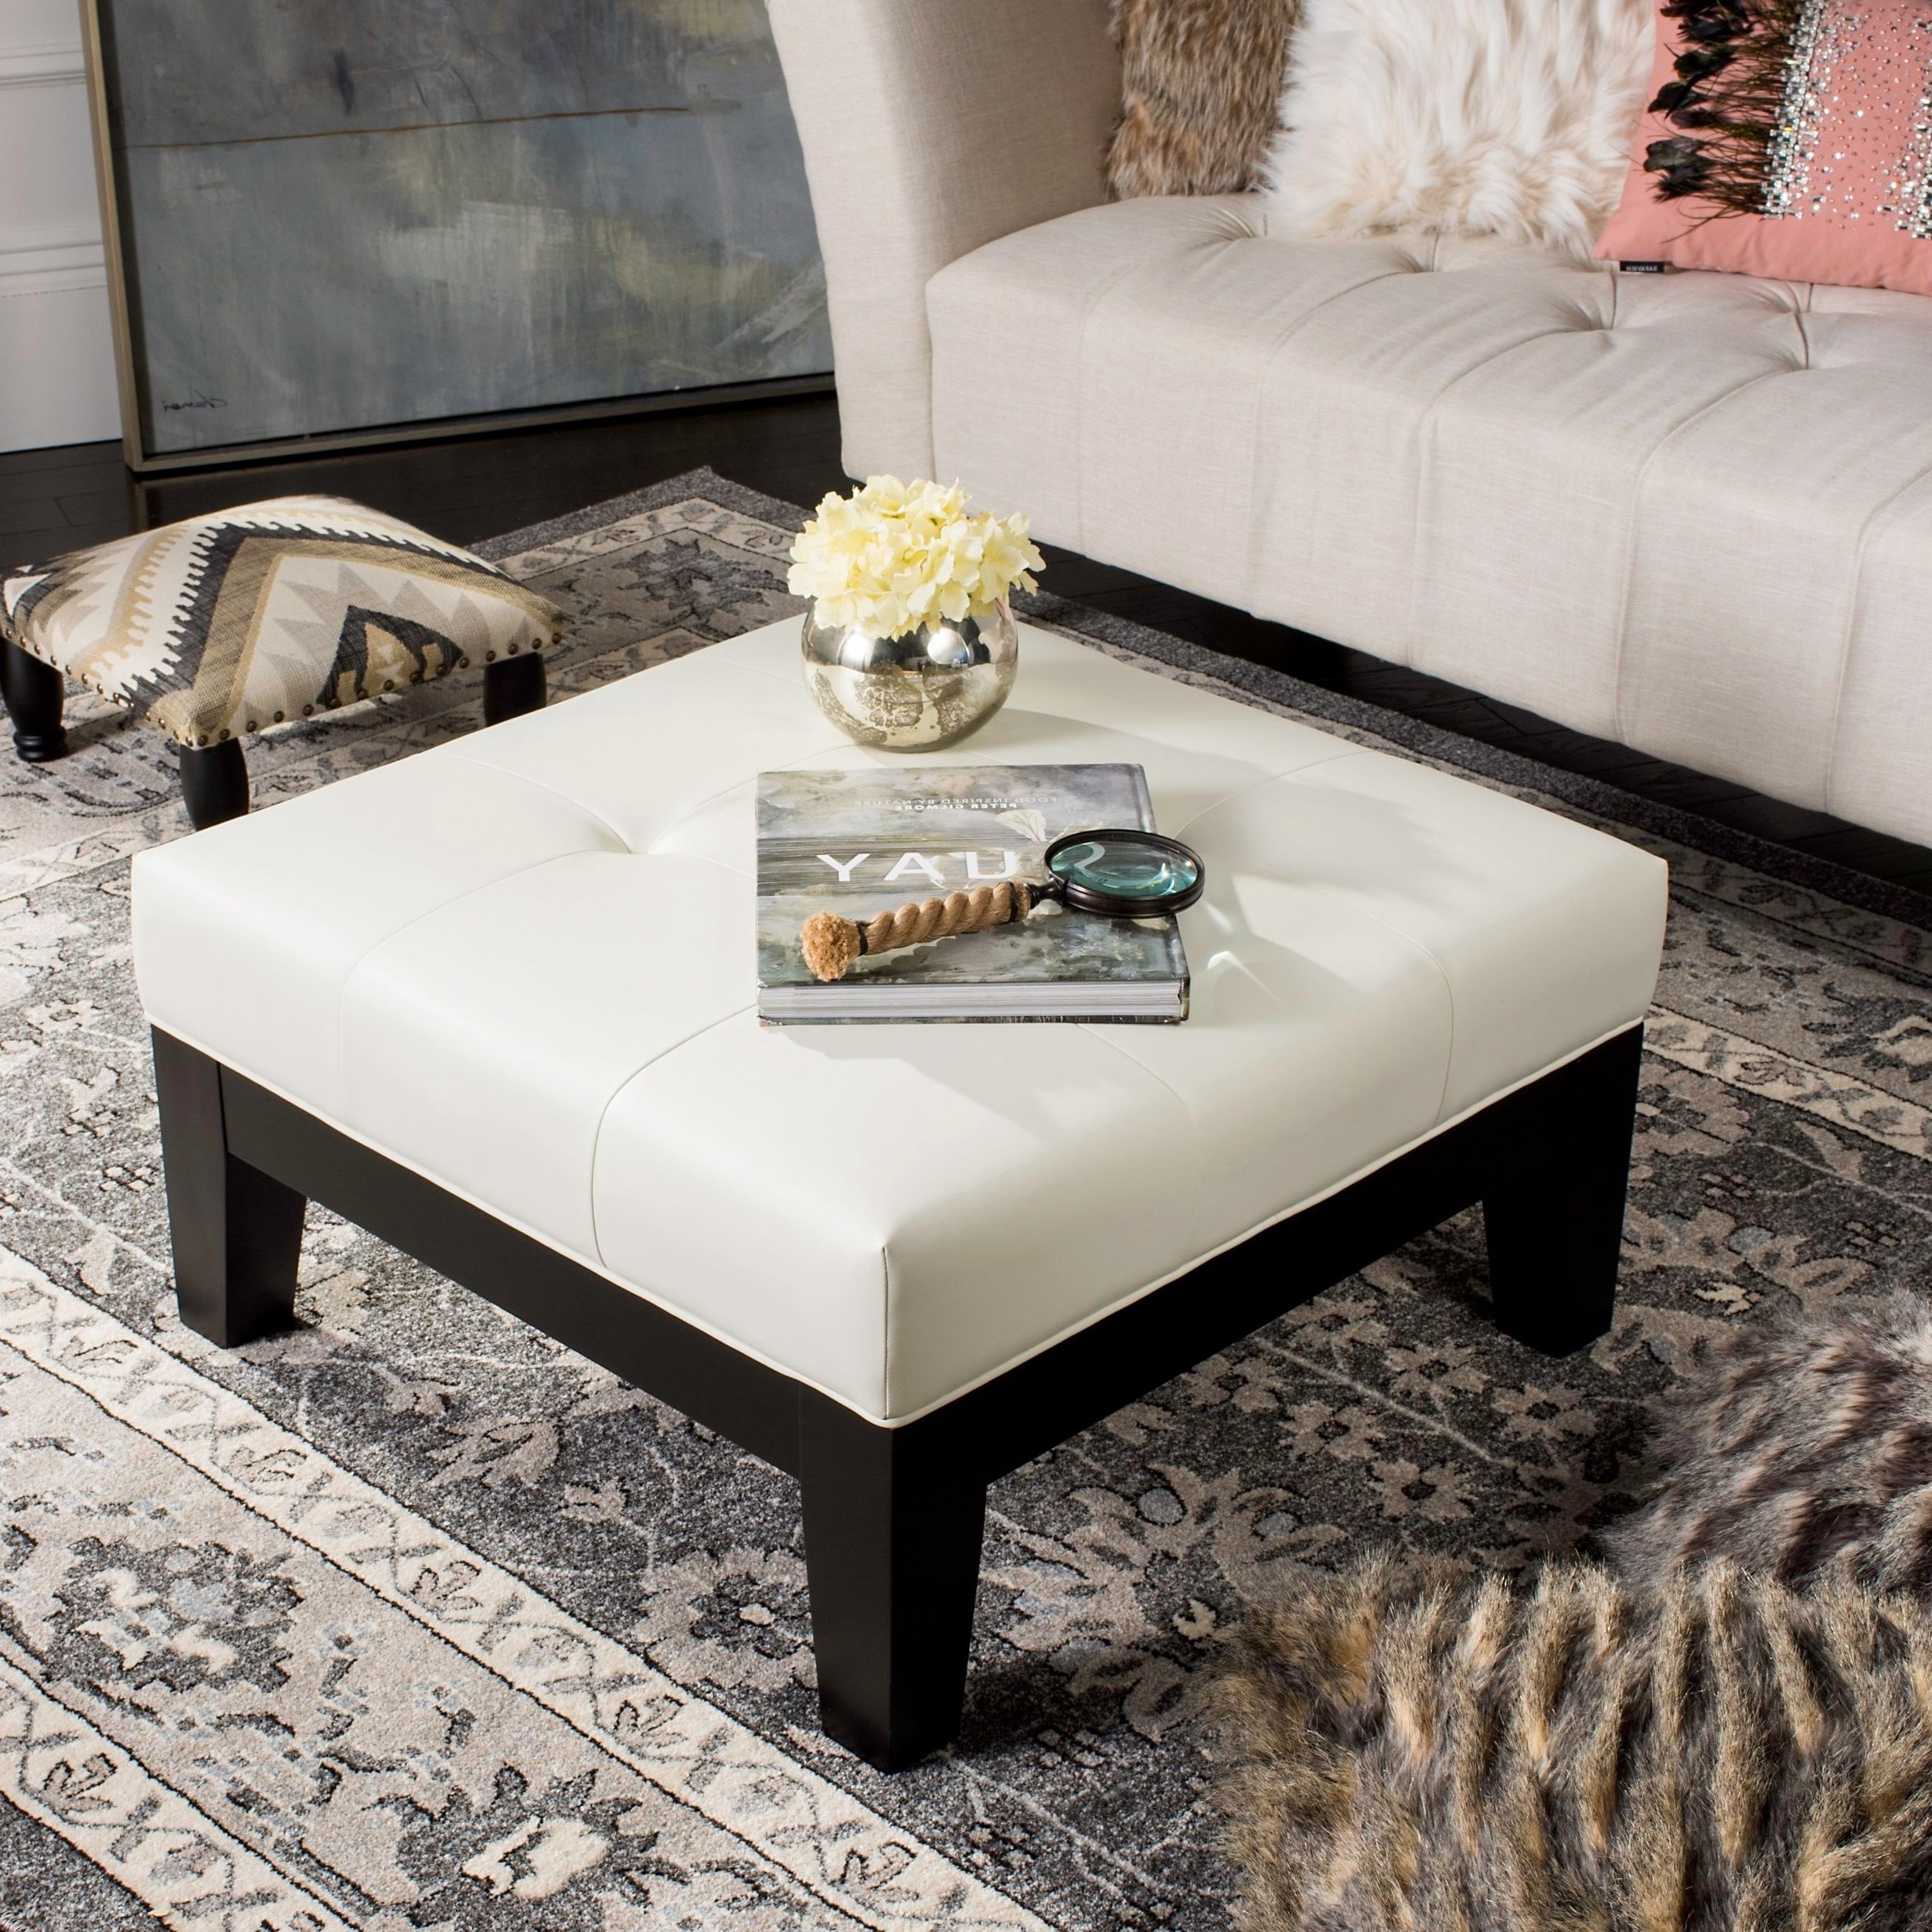 Safavieh Supreme Square White Leather Ottoman White, Black, Off White With Regard To Most Up To Date Black And Off White Rattan Ottomans (View 10 of 10)